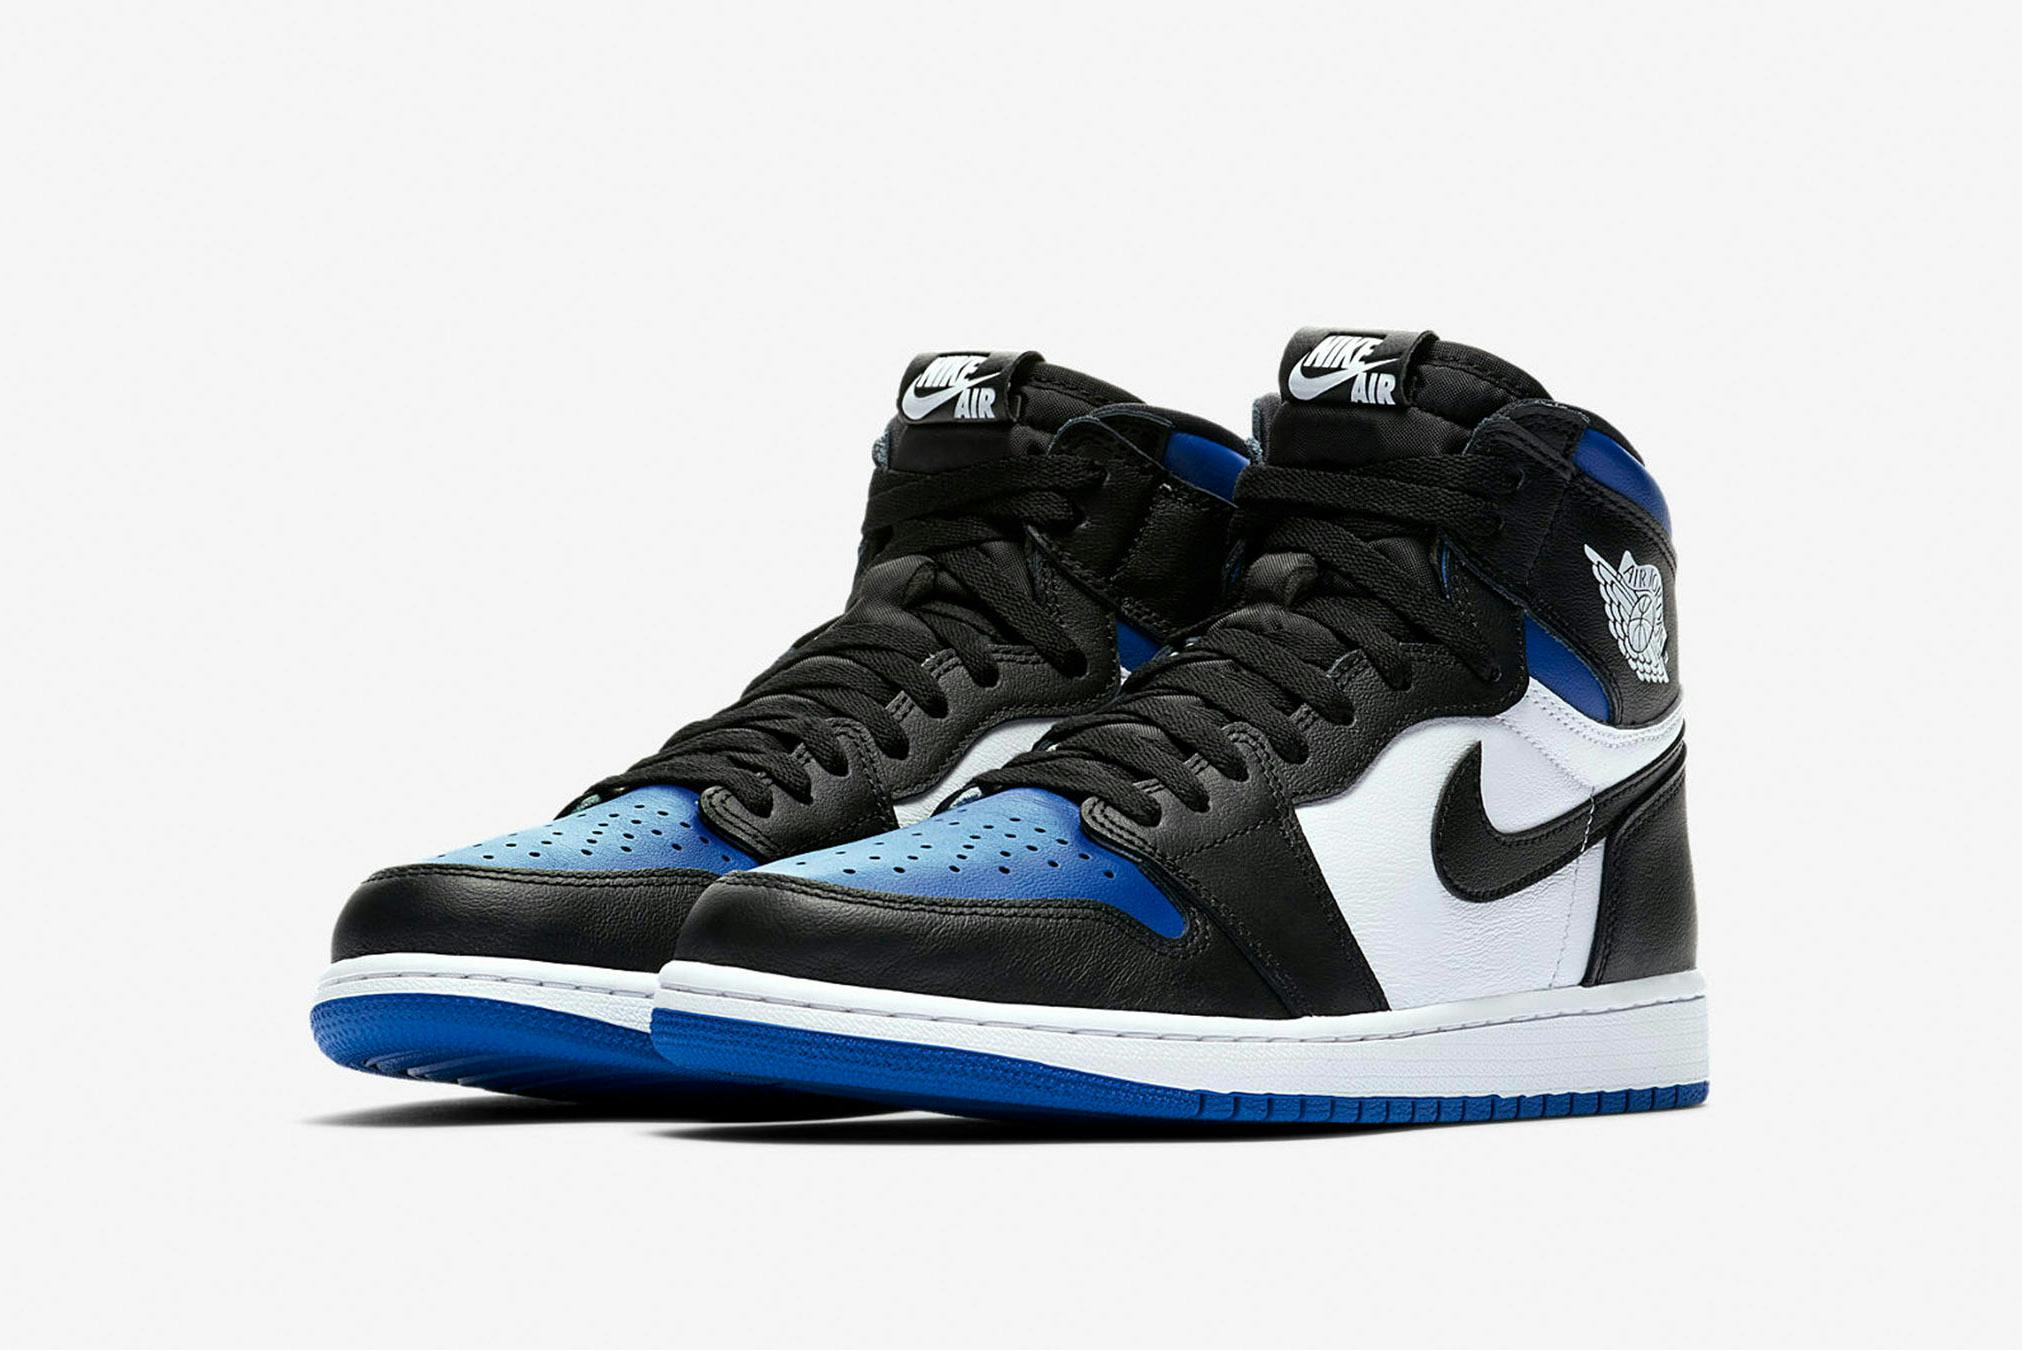 End Features Air Jordan 1 Retro Hi Game Royal Toe Register Now On End Launches